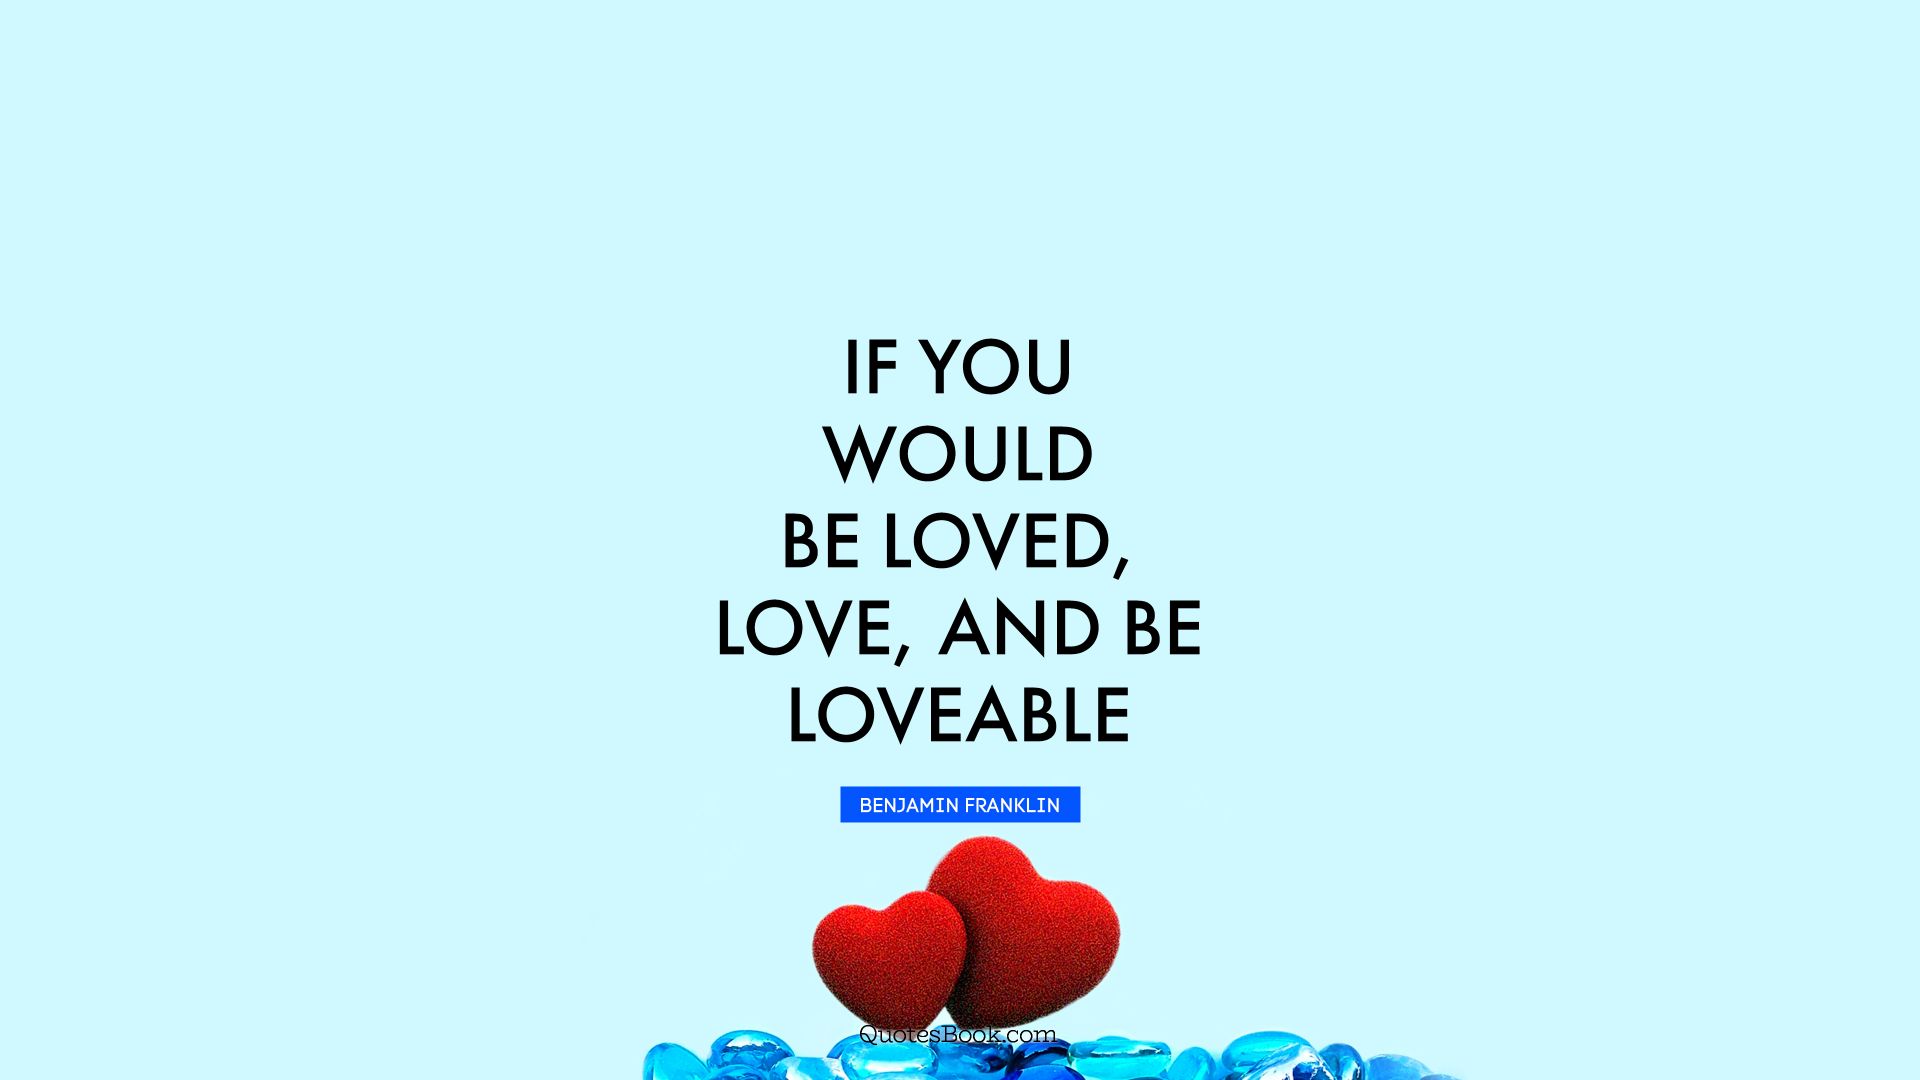 If you would be loved, love, and be loveable. - Quote by Benjamin Franklin